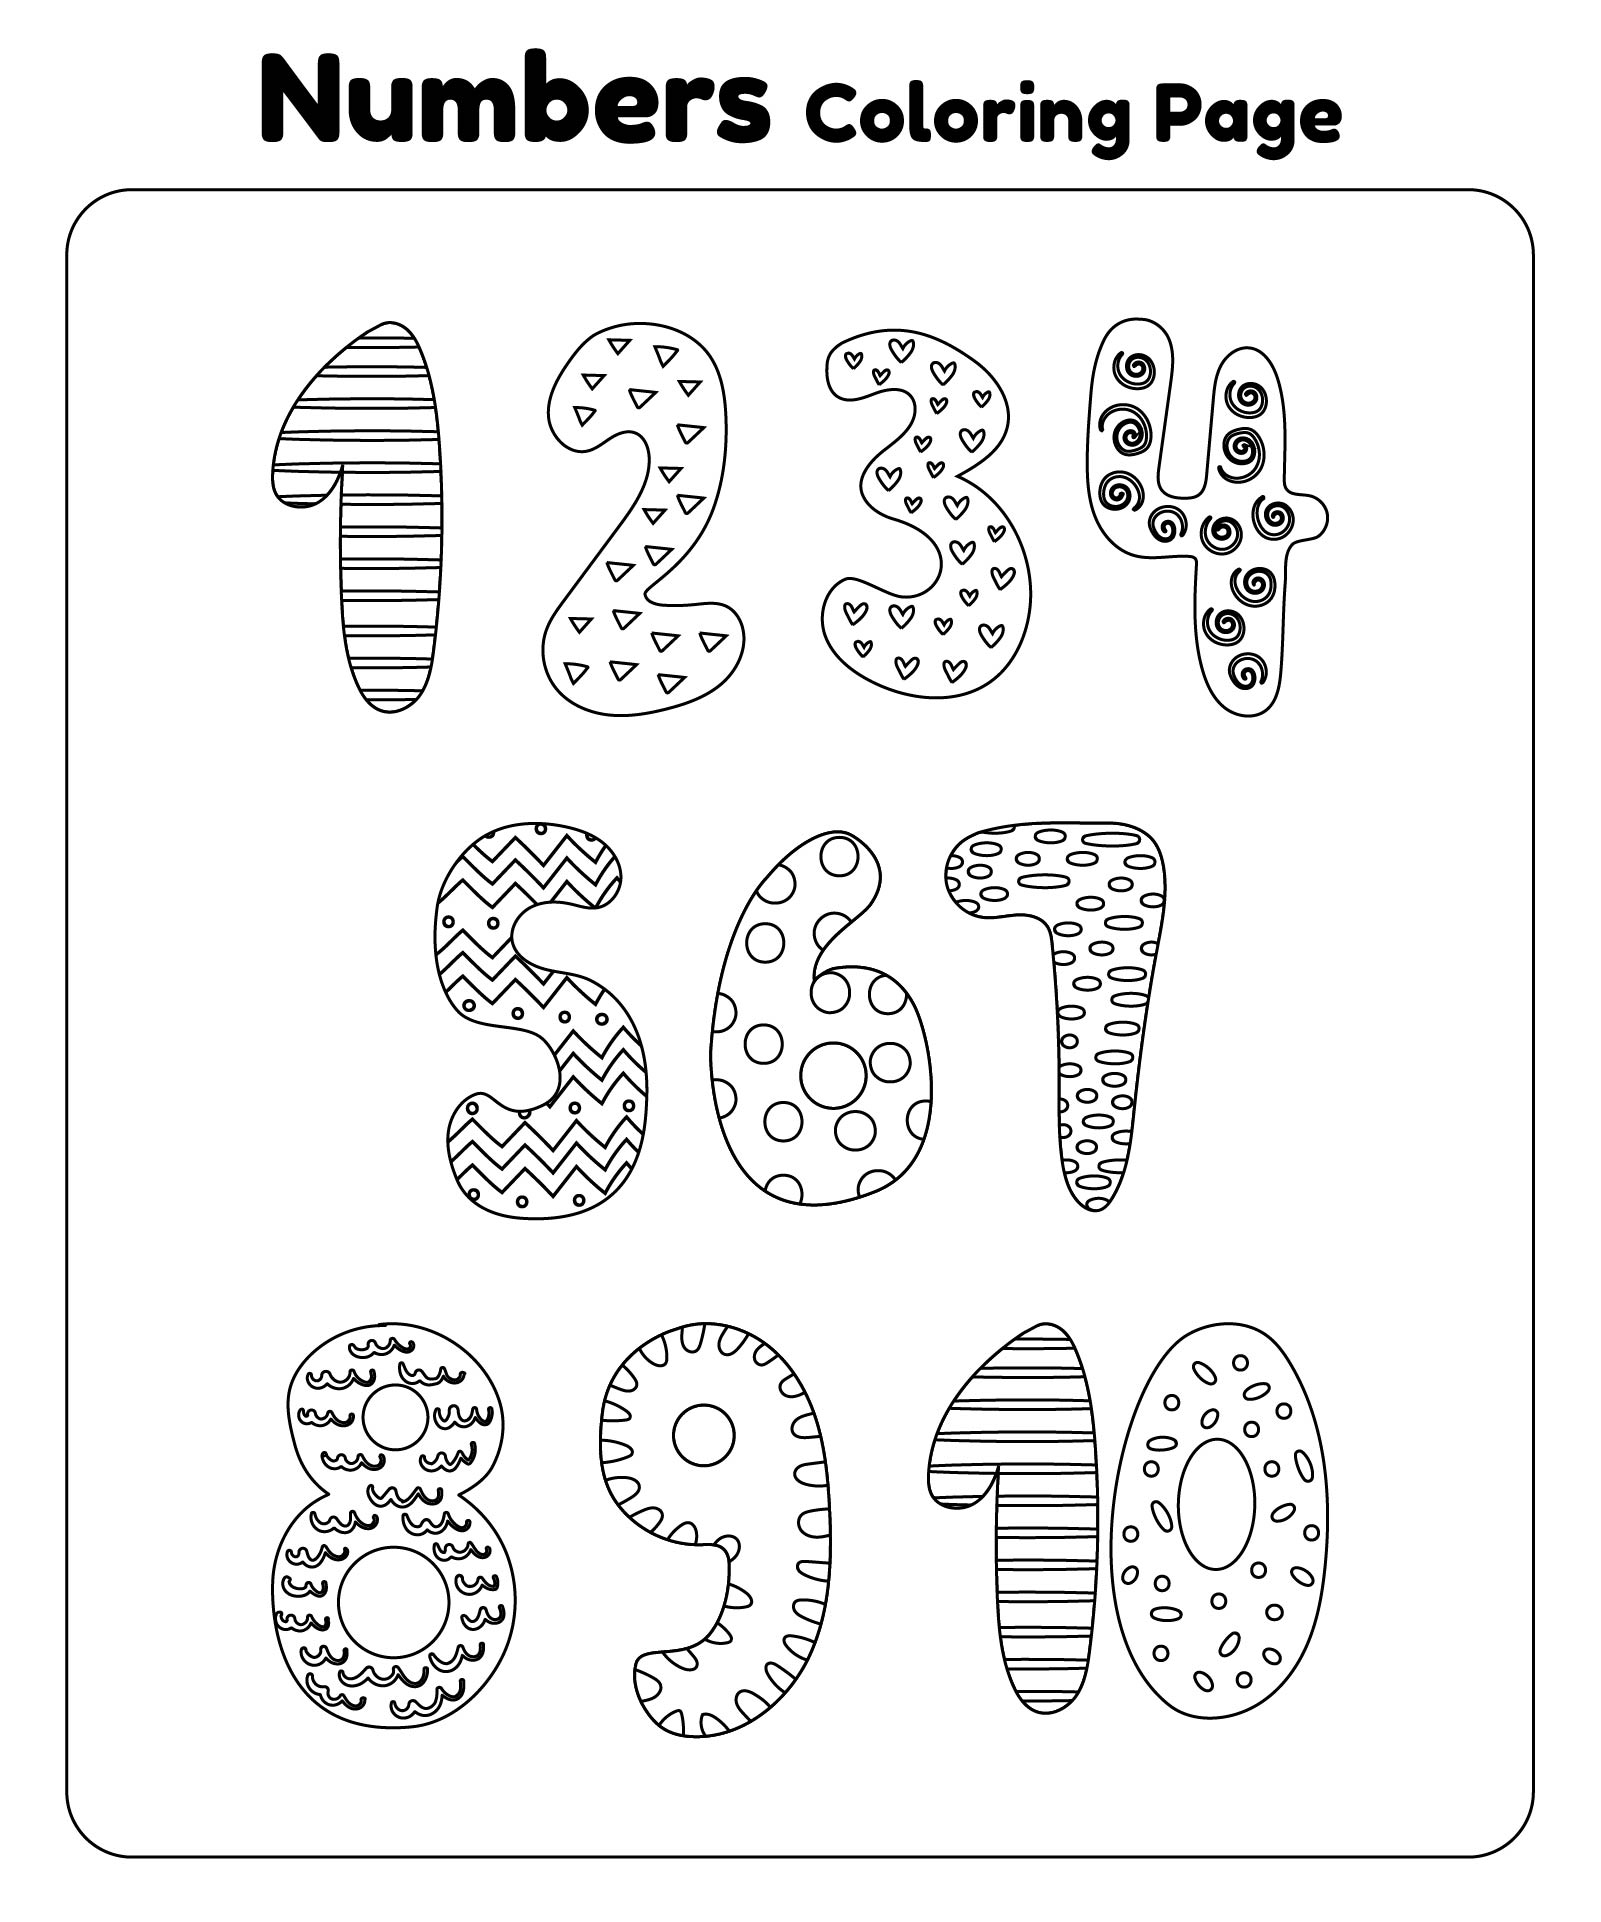 Printable Number Coloring Pages 1-10 For Kids